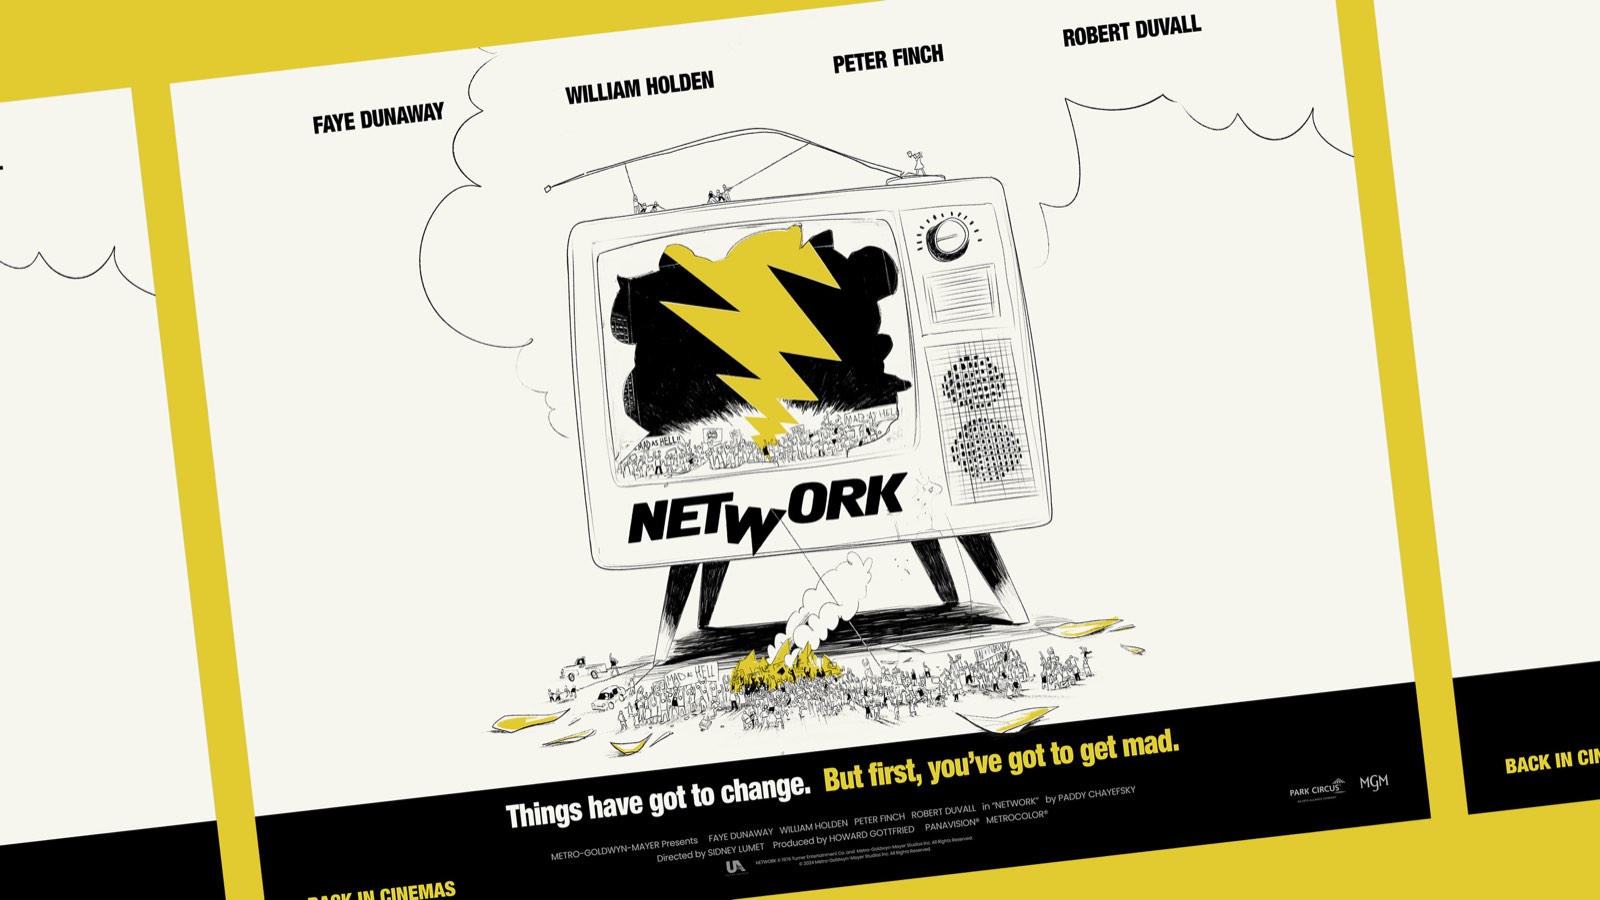 Tune back into Network - new artwork and re-release announced